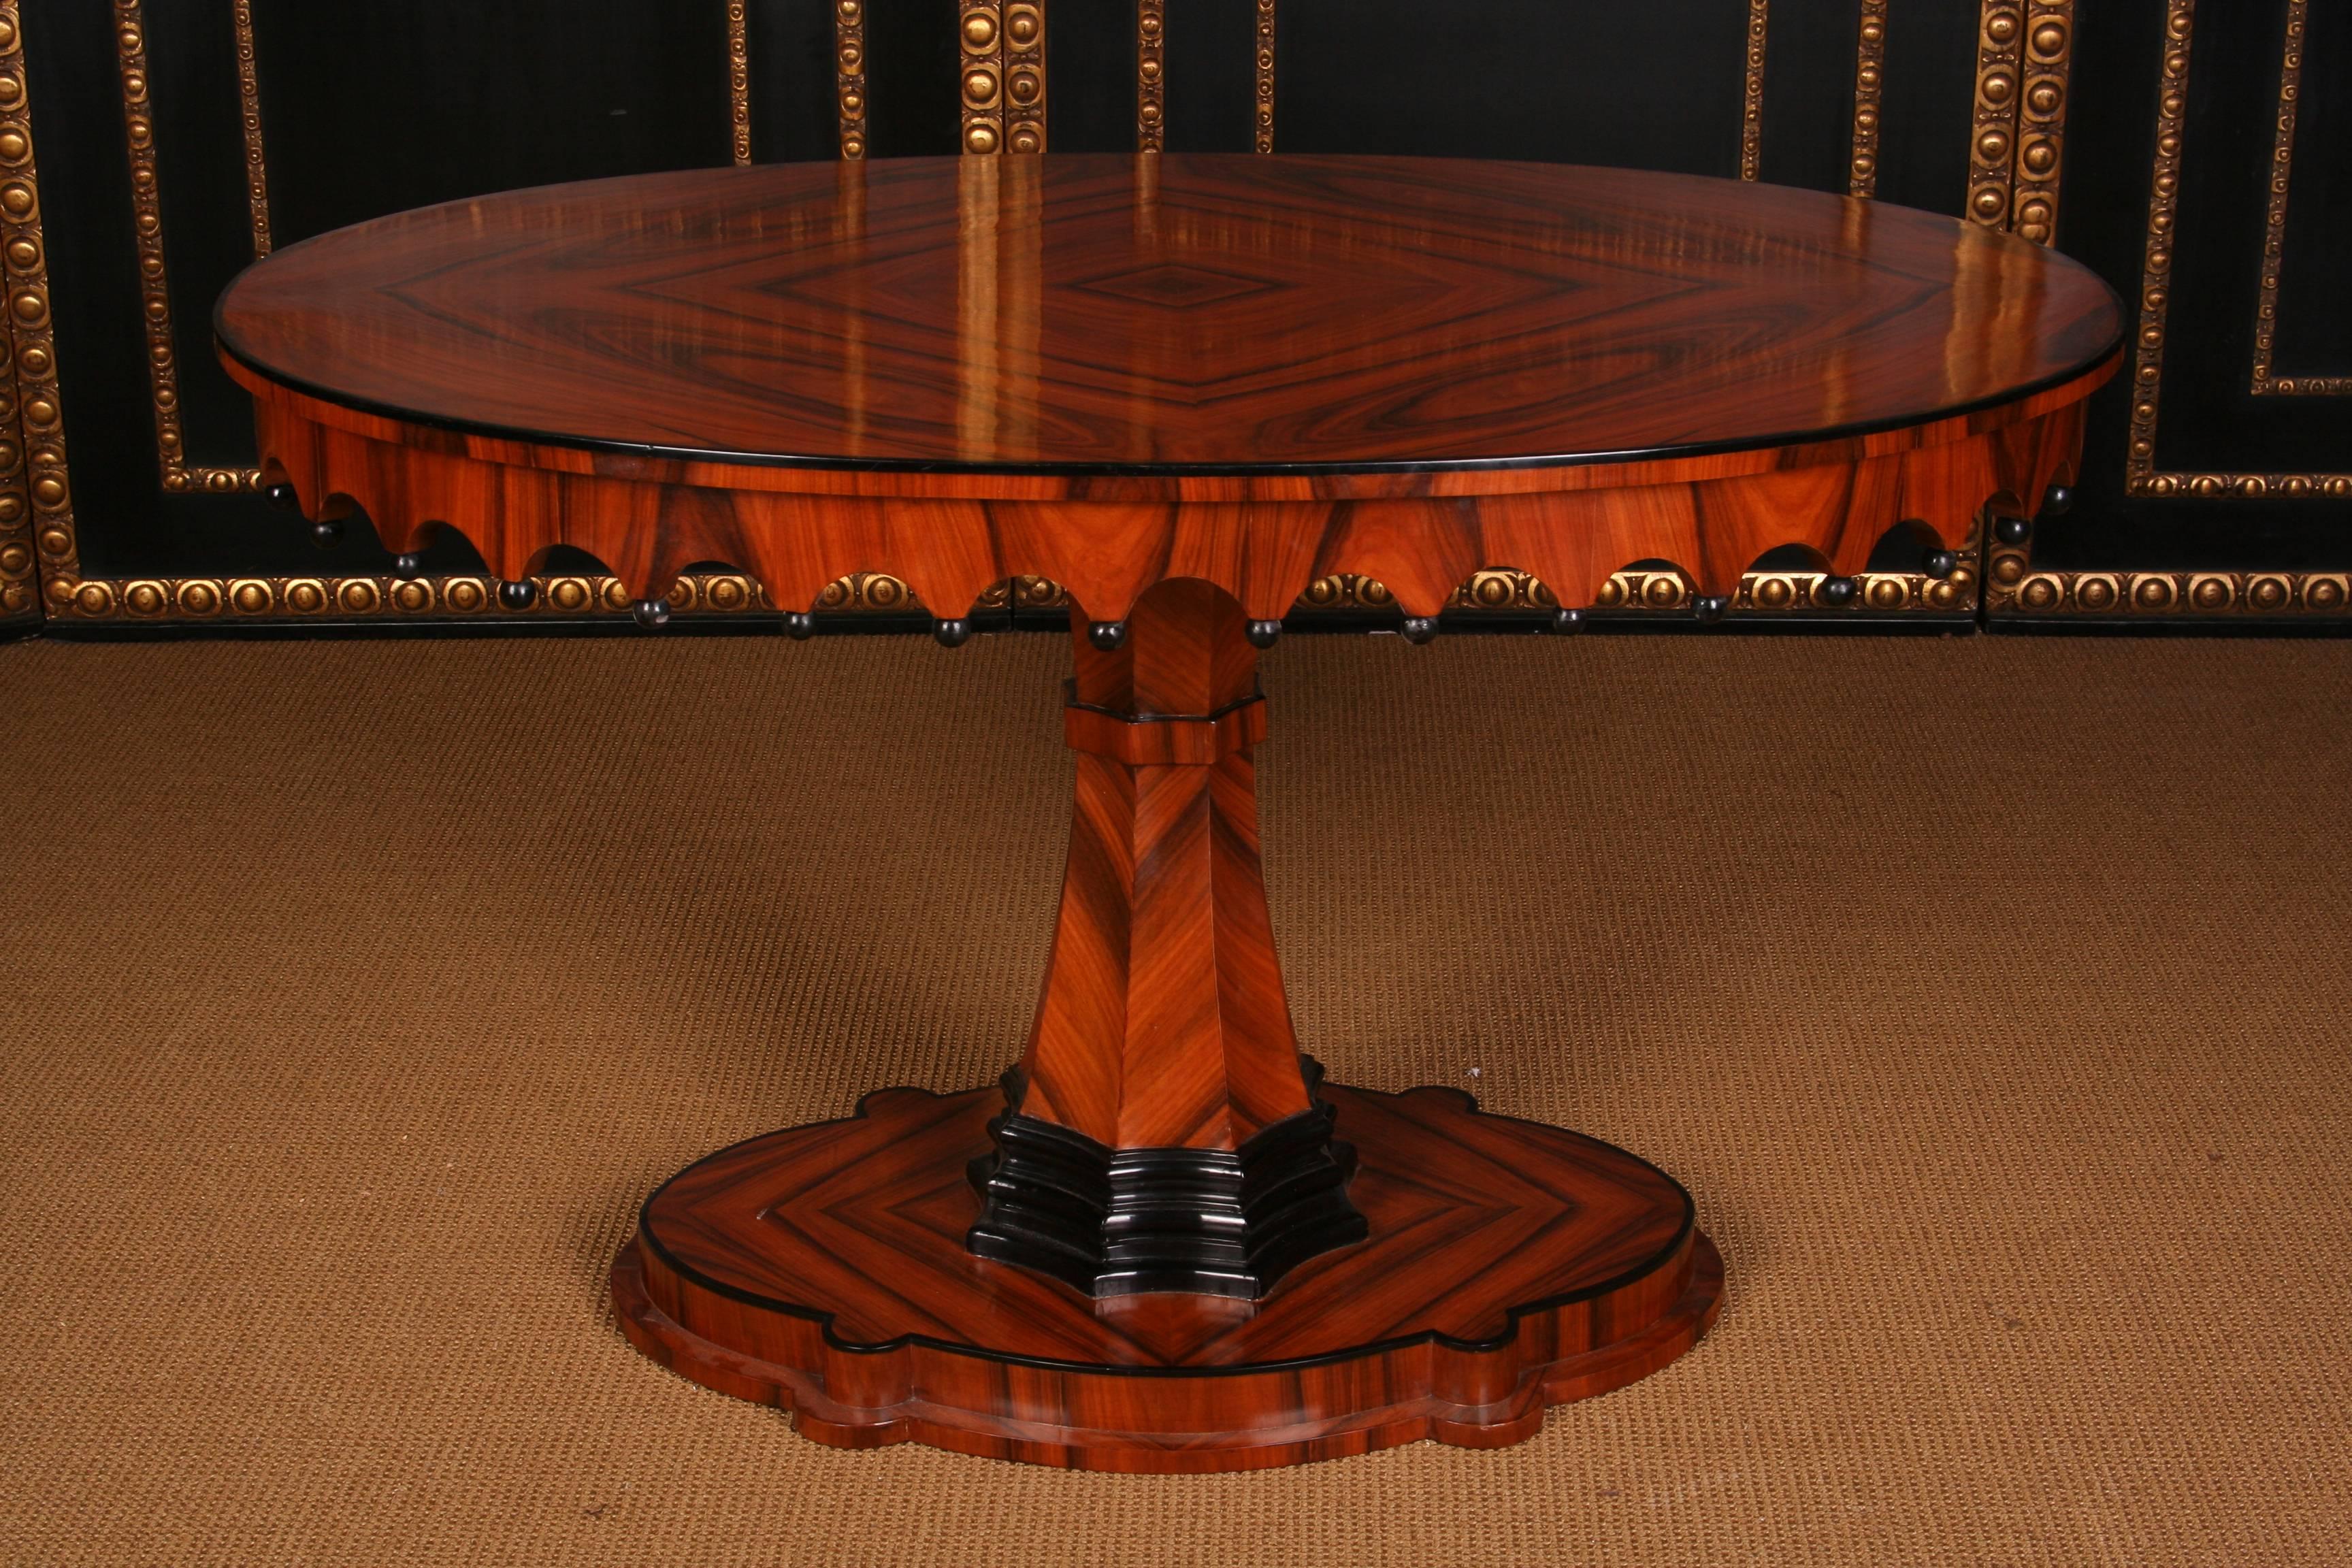 Mahogany on solid wood. Oval curved and profiled base plate. Centrally rising, eightfold folded fan-shaped column, partly blackened. Gothic frame with protruding profile plate. This form is extremely rare. Patina and honey-colored veneer correspond